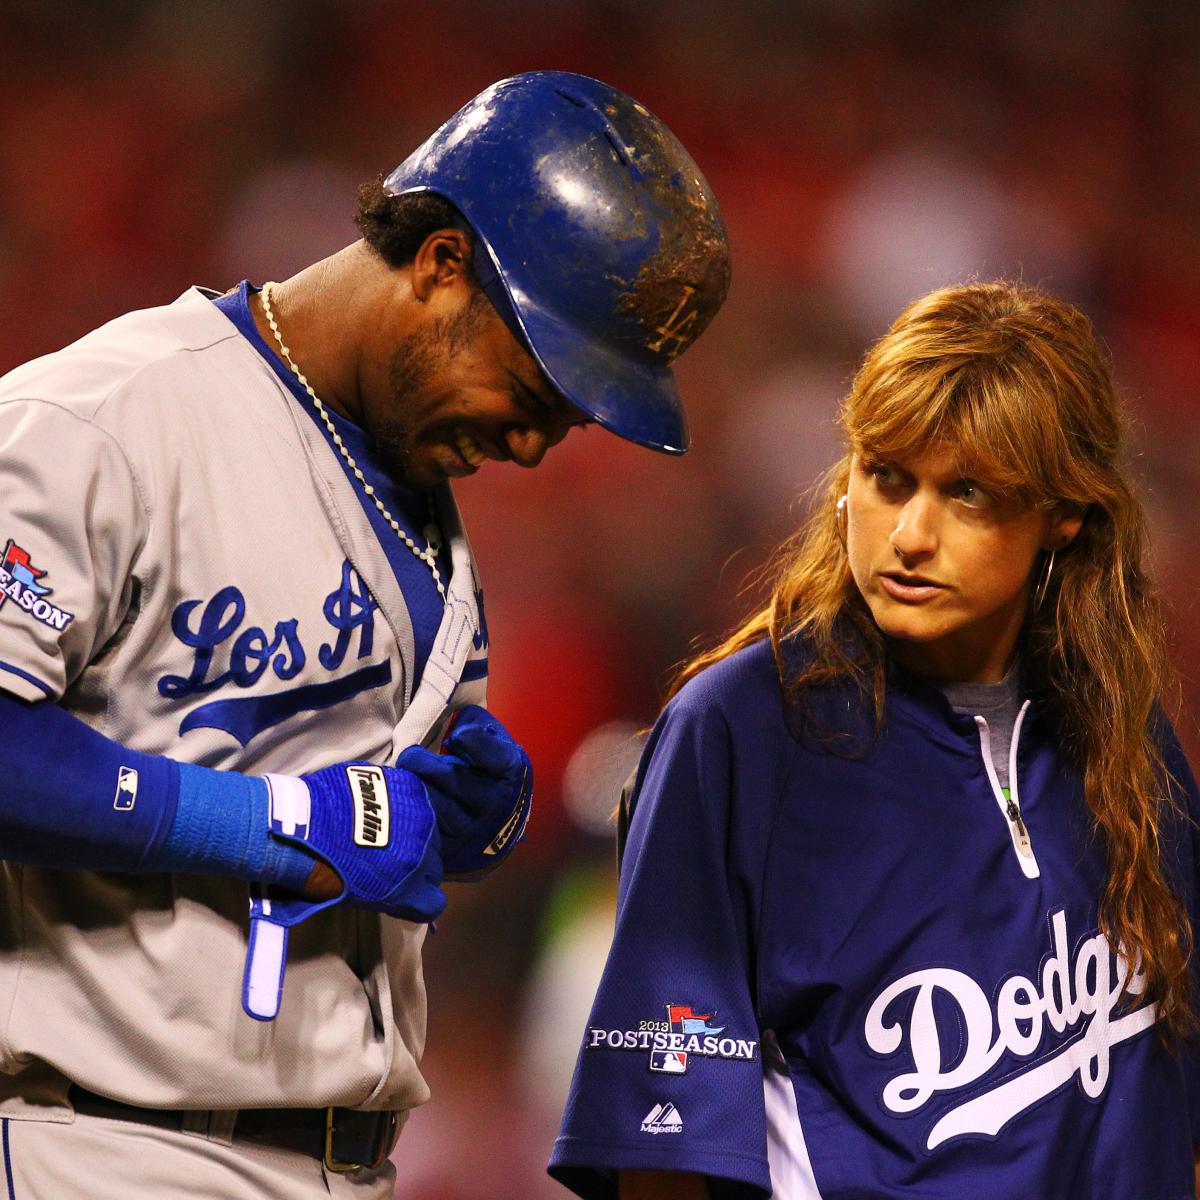 Hanley Ramirez remade himself, with remarkable results - The